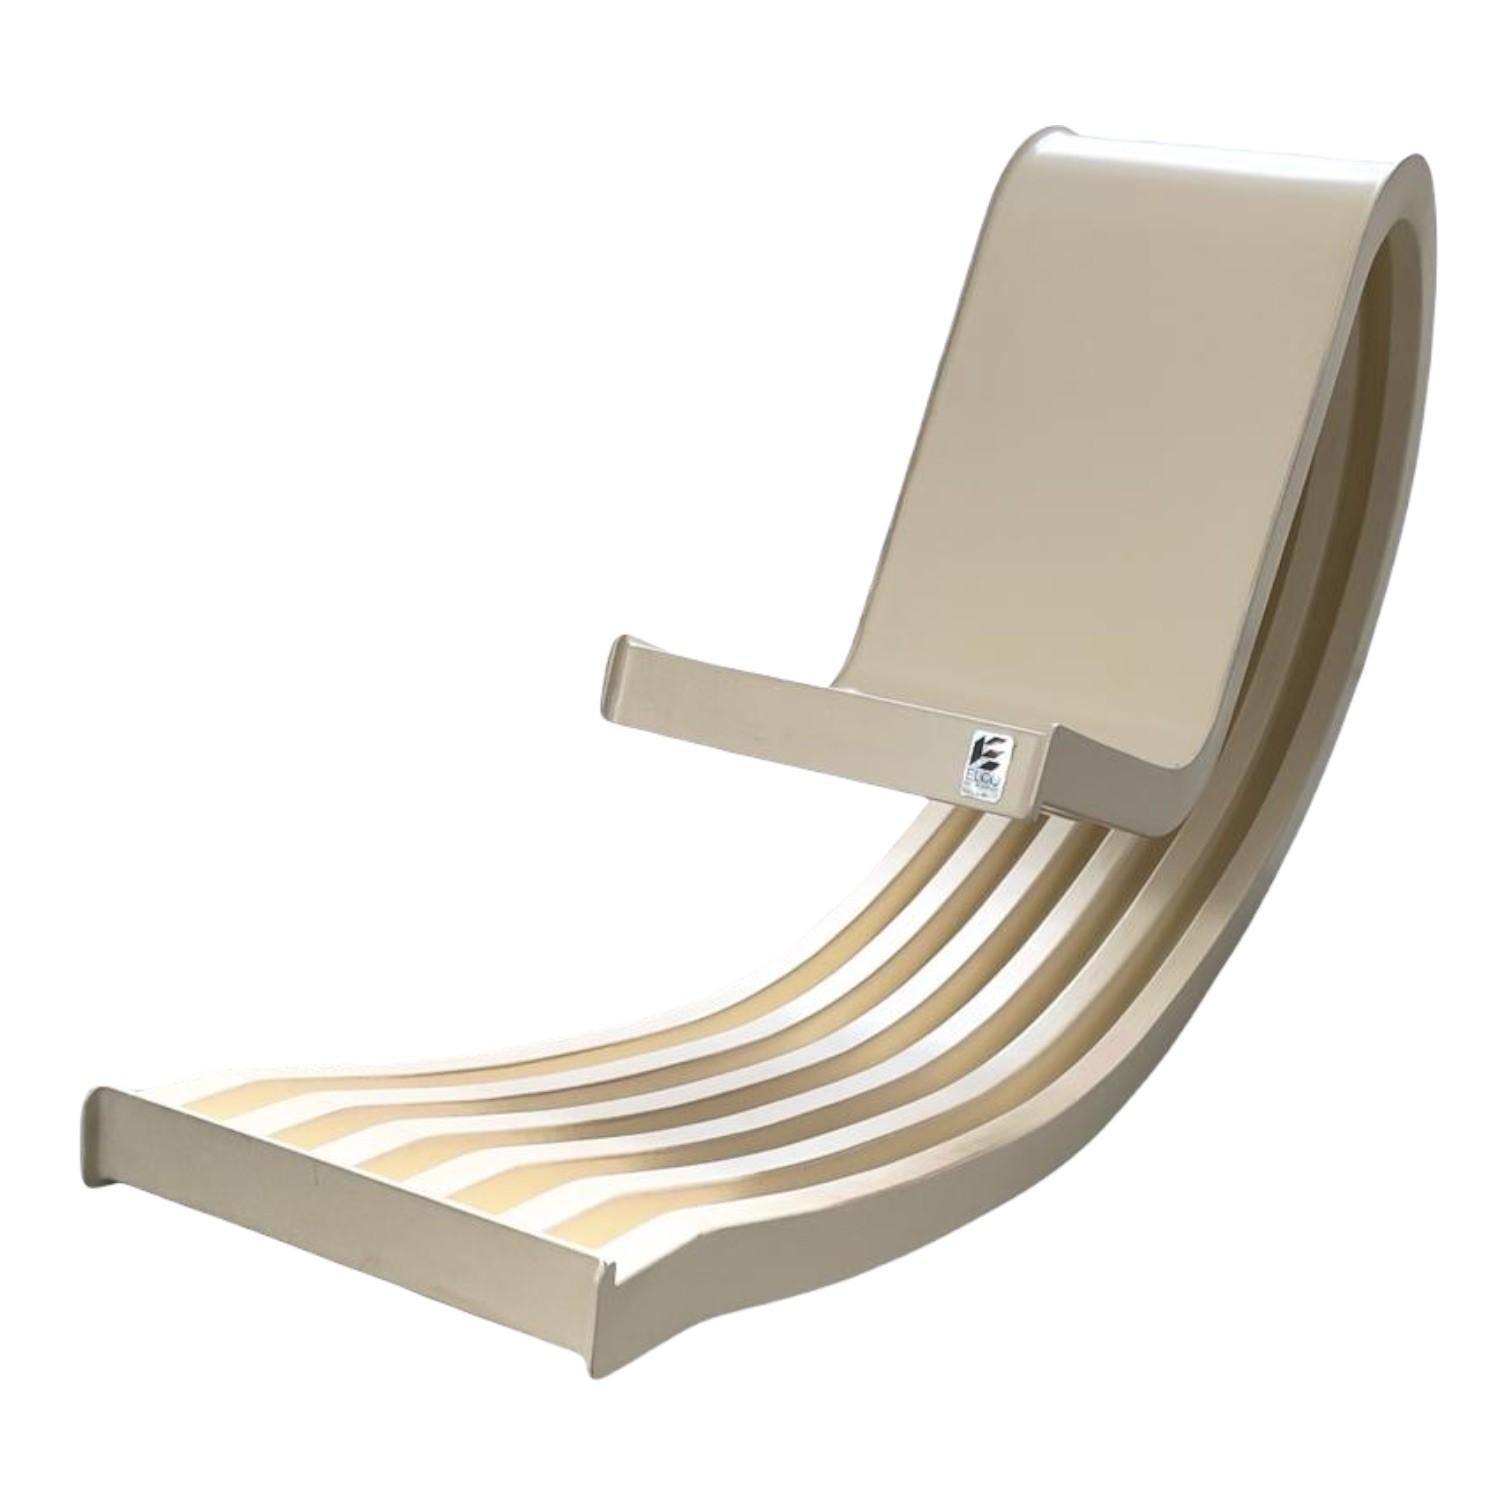 Vintage rocking chair designed by Leonardi and Franca Stagi one evening in 1967.
Continuous tape in double sheet of fiberglass and polyester resin corrugated on the inner face. The object is defined by a continuous ribbon of polyester resin that,